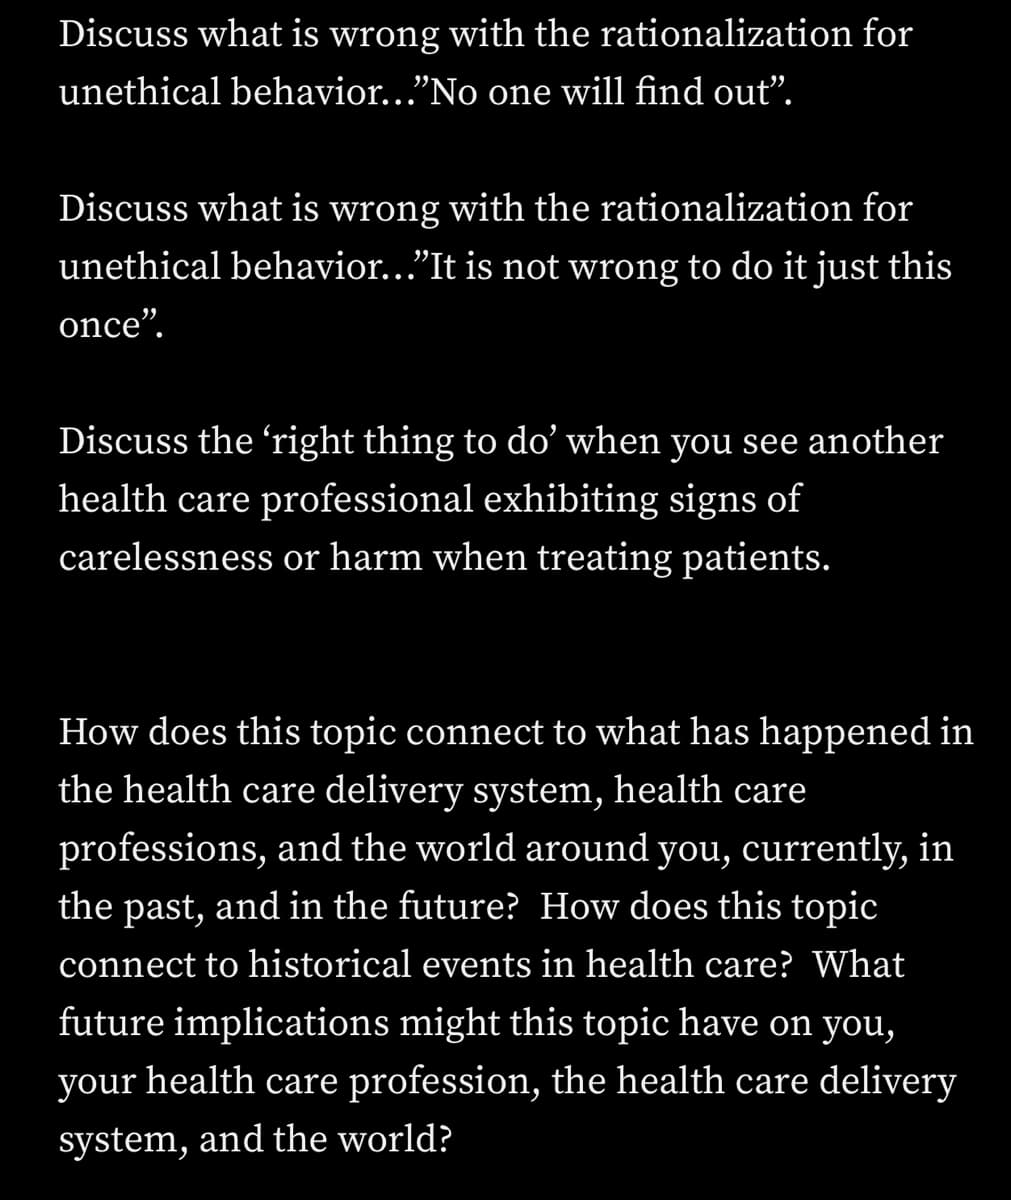 Discuss what is wrong with the rationalization for
unethical behavior..."No one will find out".
Discuss what is wrong with the rationalization for
unethical behavior..."It is not wrong to do it just this
once".
Discuss the right thing to do' when you see another
health care professional exhibiting signs of
carelessness or harm when treating patients.
How does this topic connect to what has happened in
the health care delivery system, health care
professions, and the world around you, currently, in
the past, and in the future? How does this topic
connect to historical events in health care? What
future implications might this topic have on you,
your health care profession, the health care delivery
system, and the world?